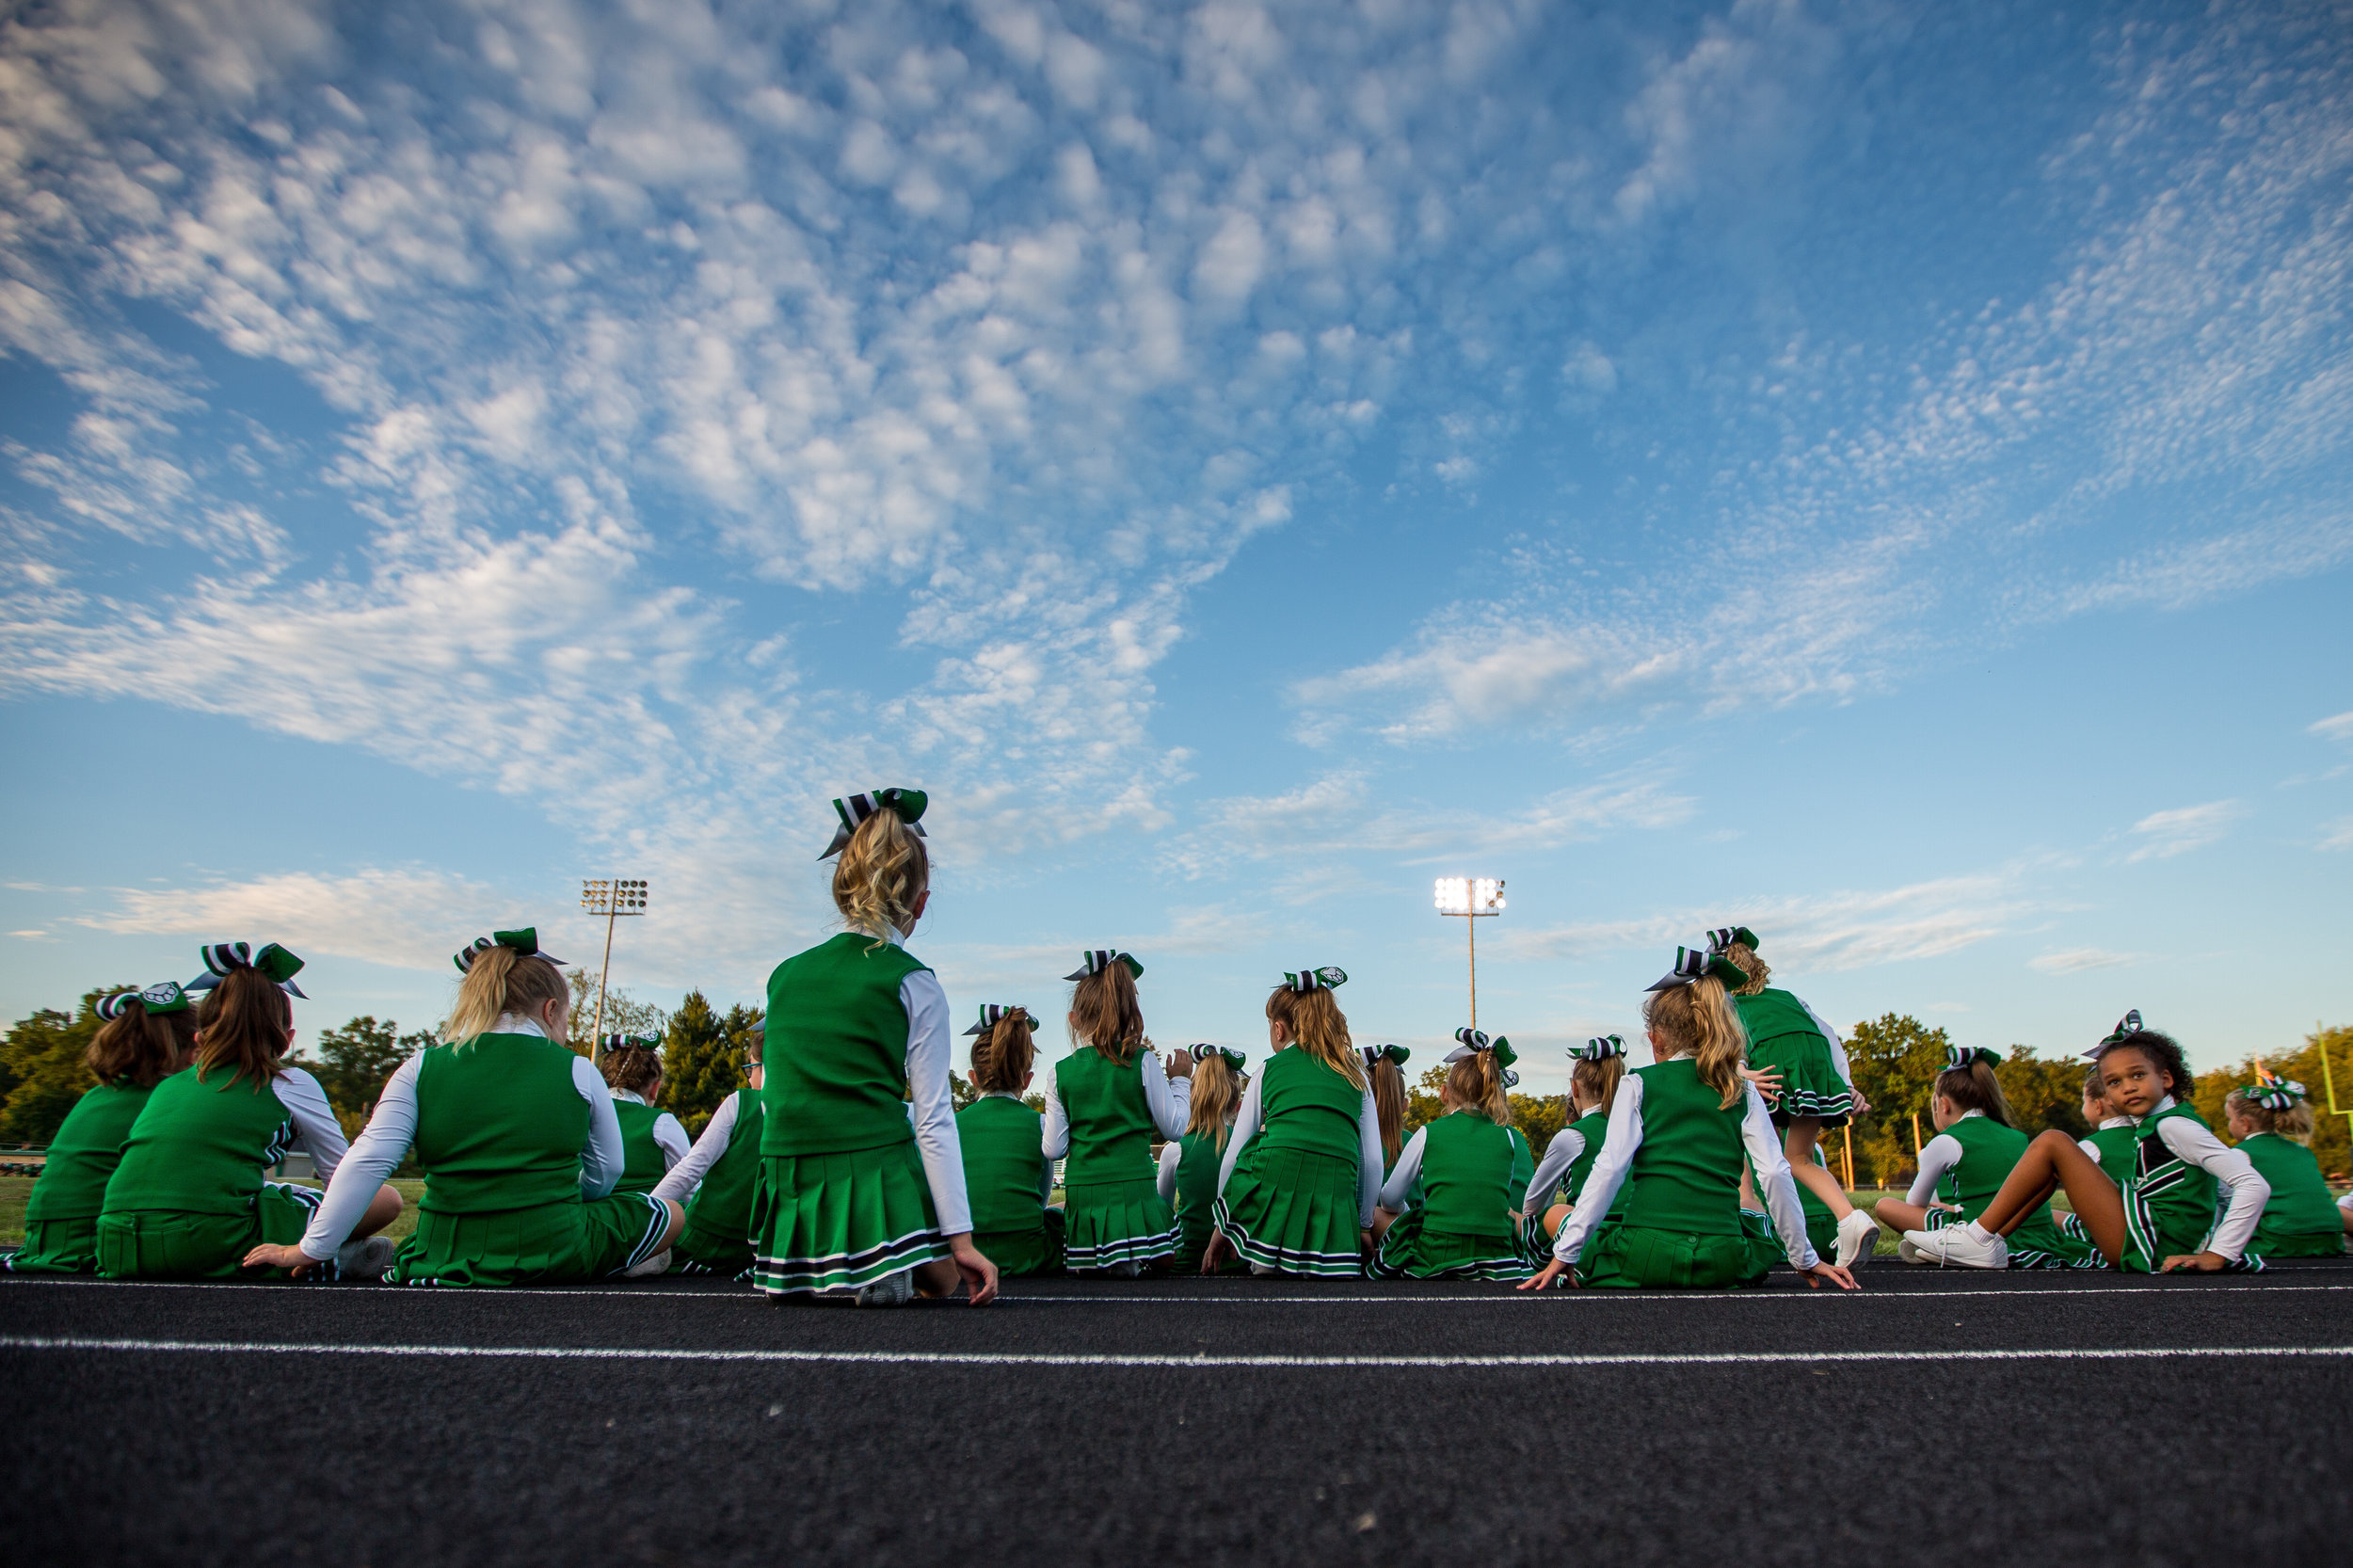  Participants of Twerp Cheer sit on the track while watching other cheerleaders perform at Riverside High School's Meet the Panthers pep rally on Thursday evening.  